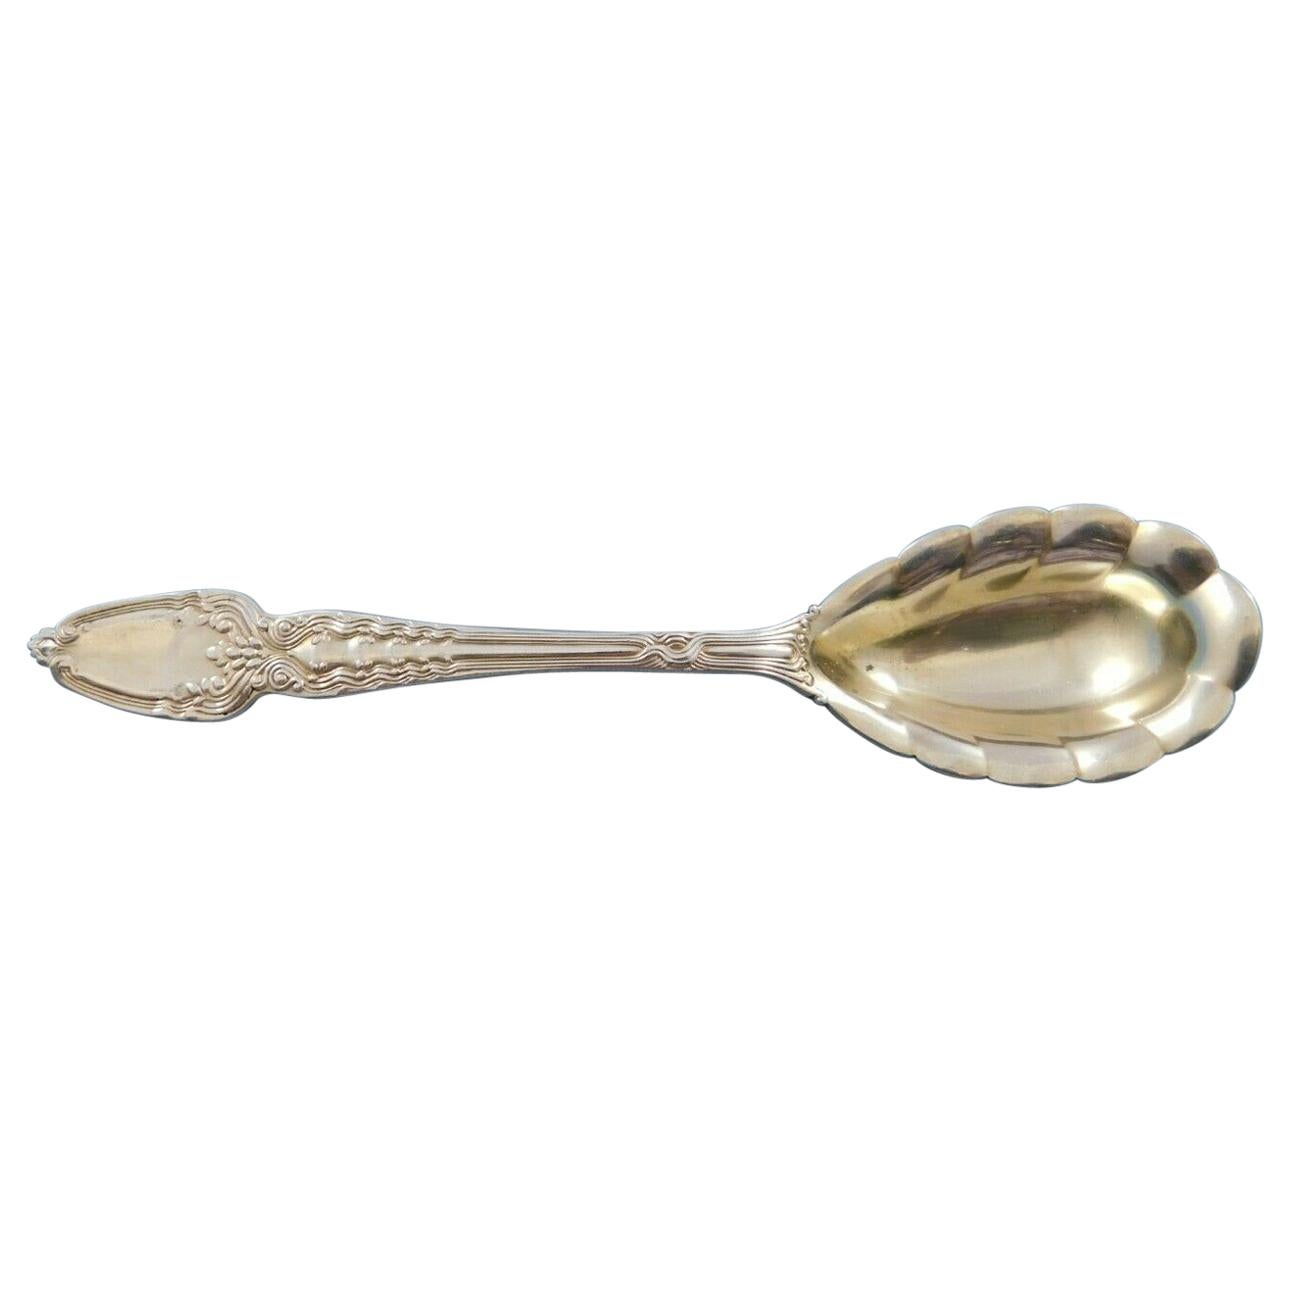 Broom Corn by Tiffany & Co. Sterling Silver Sugar Spoon Gold Washed Ruffled Edge